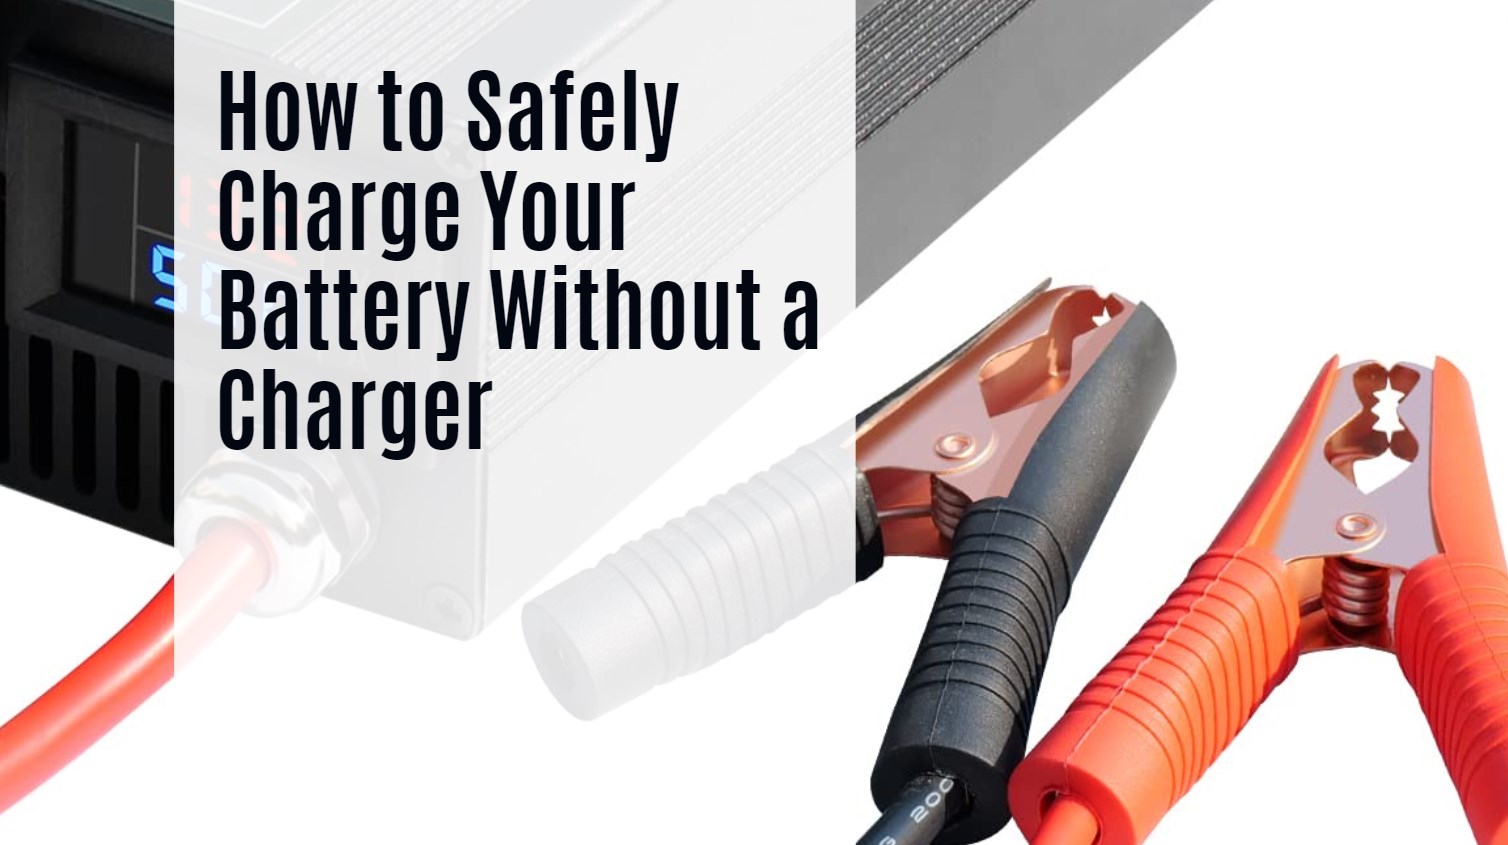 How to Safely Charge Your Battery Without a Charger